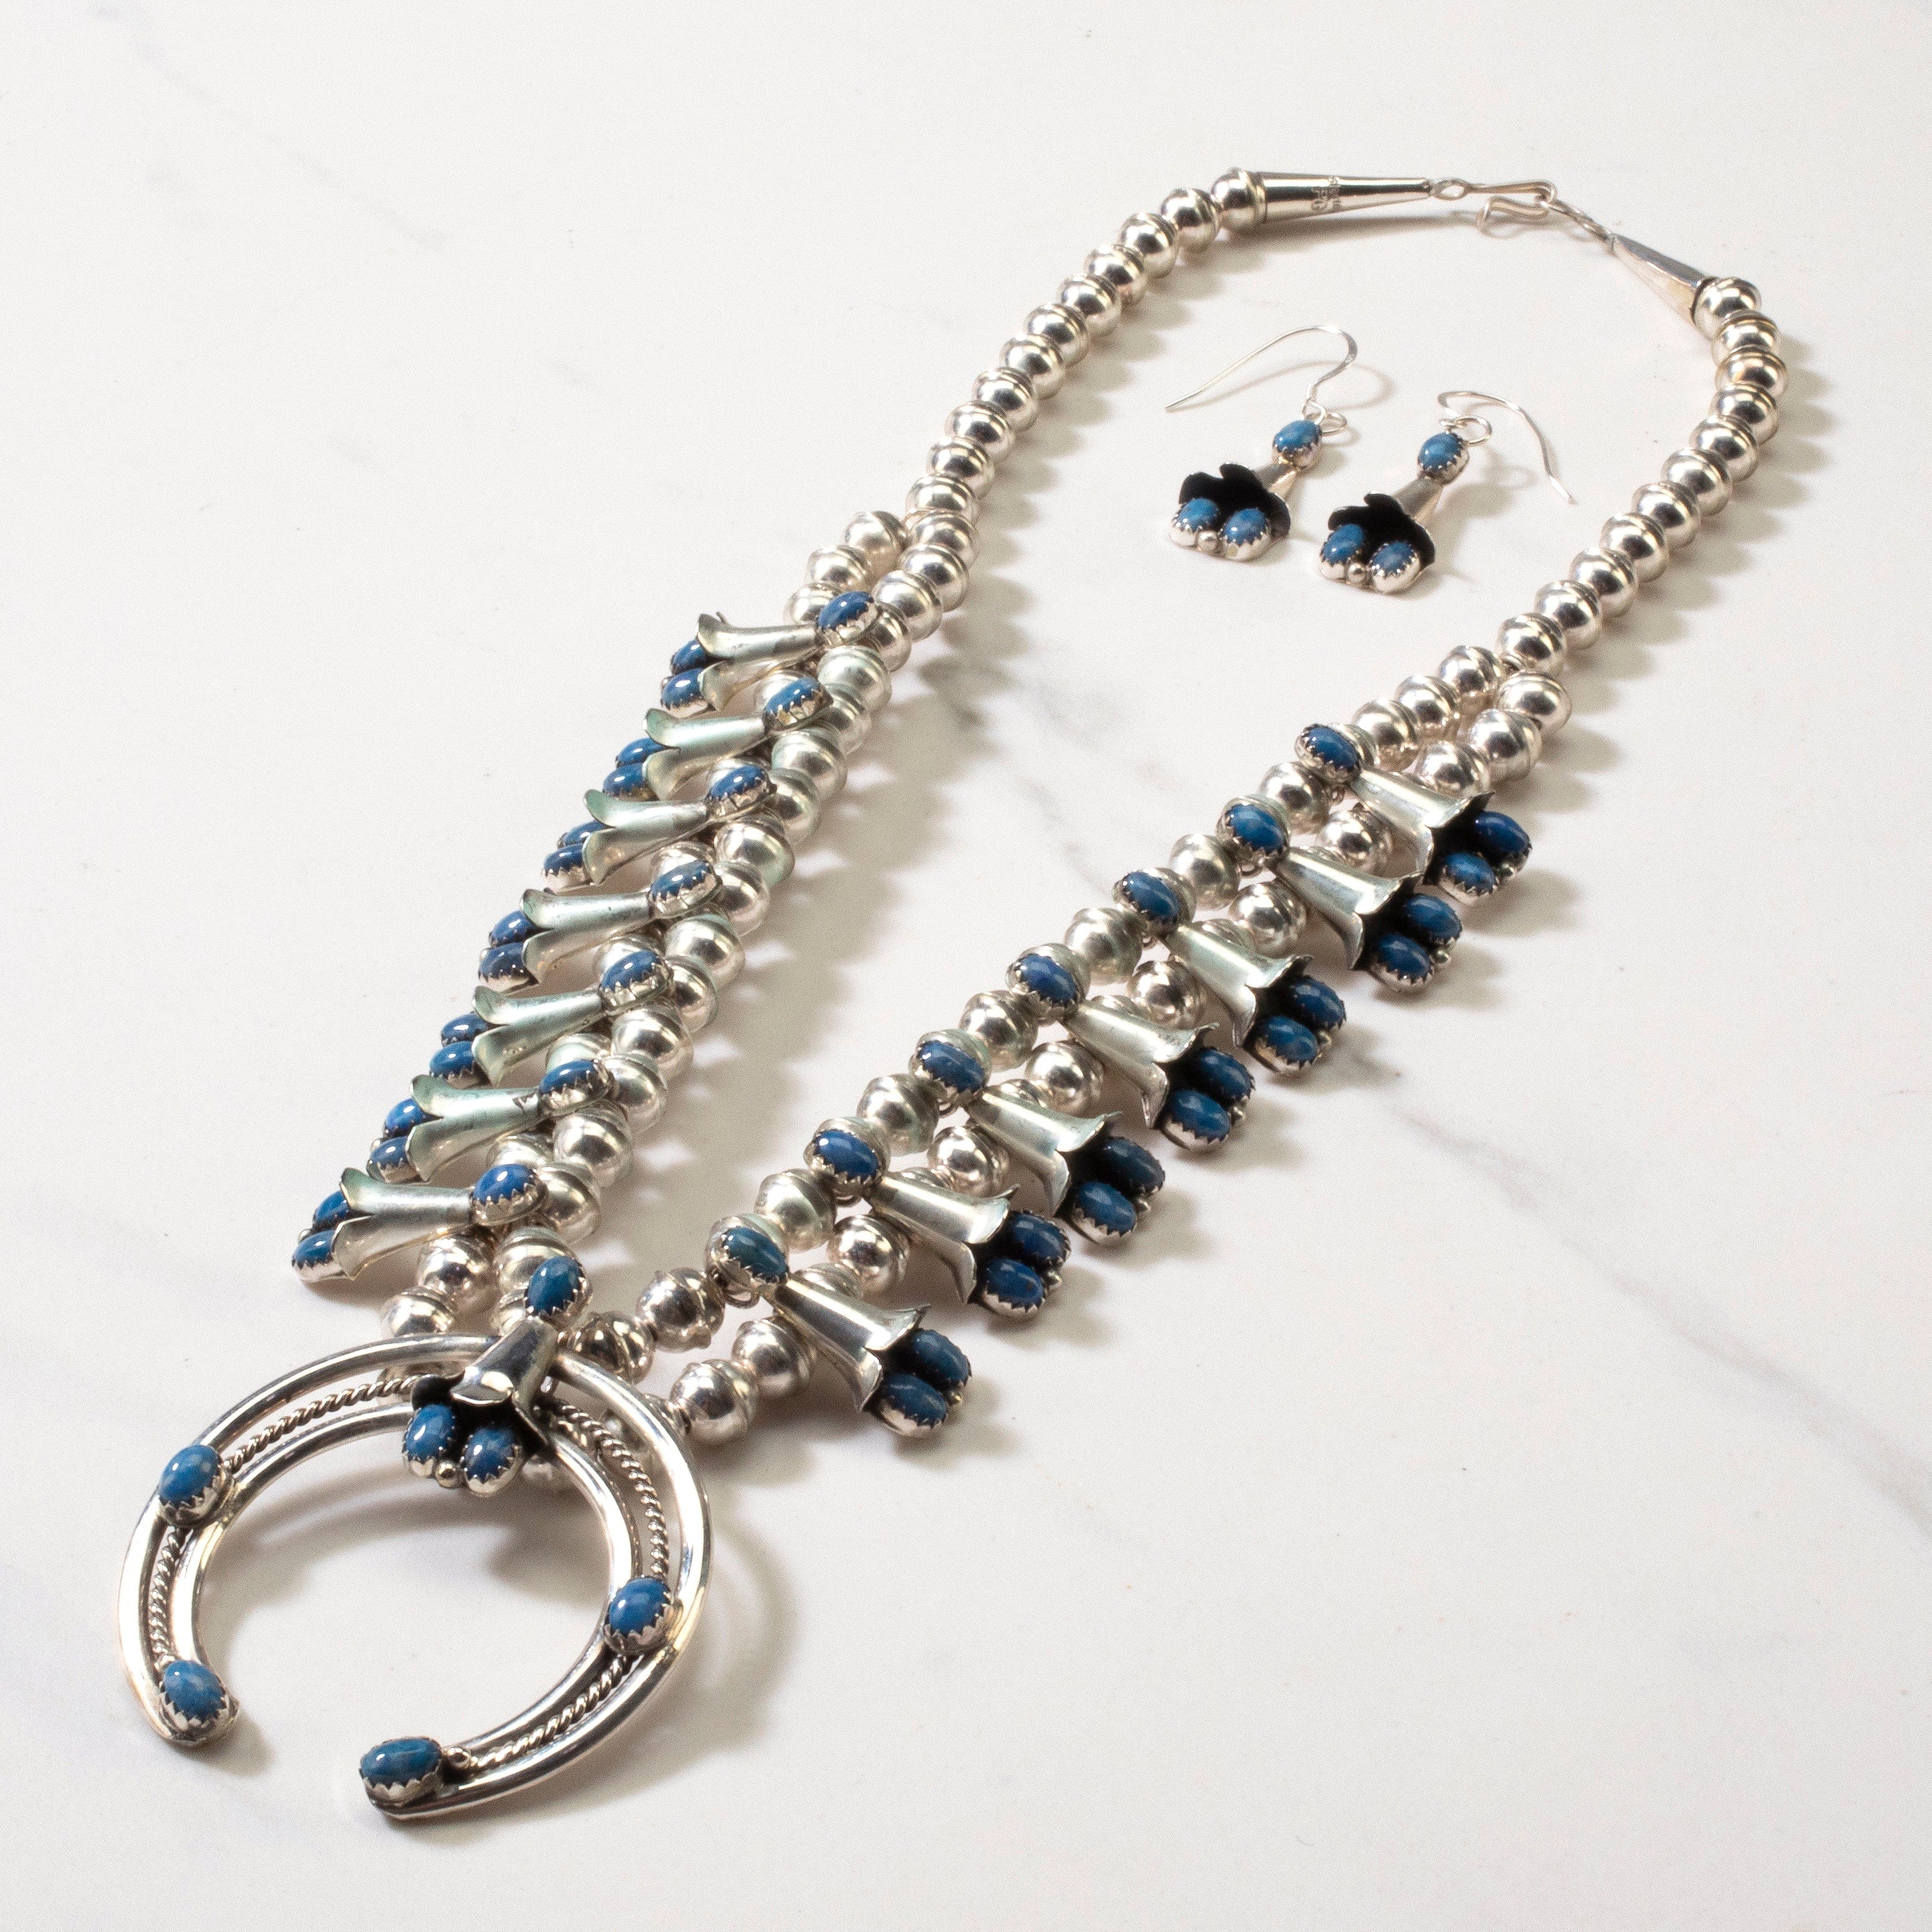 Kalifano Native American Jewelry 17" Phil Garcia Navajo Squash Blossom Denim Lapis USA Native American Made 925 Sterling Silver Necklace & French Hook Earring Set NAN2800.004